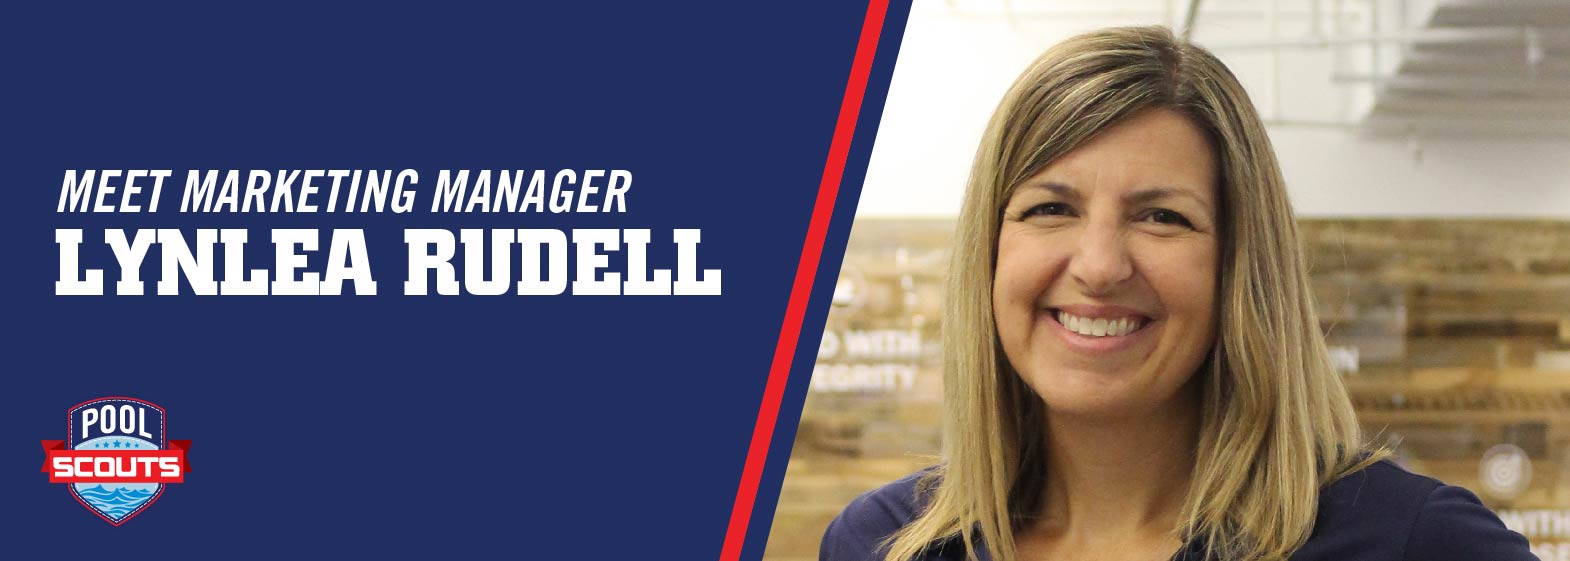 Image of Meet Marketing Manager Lynlea Rudell